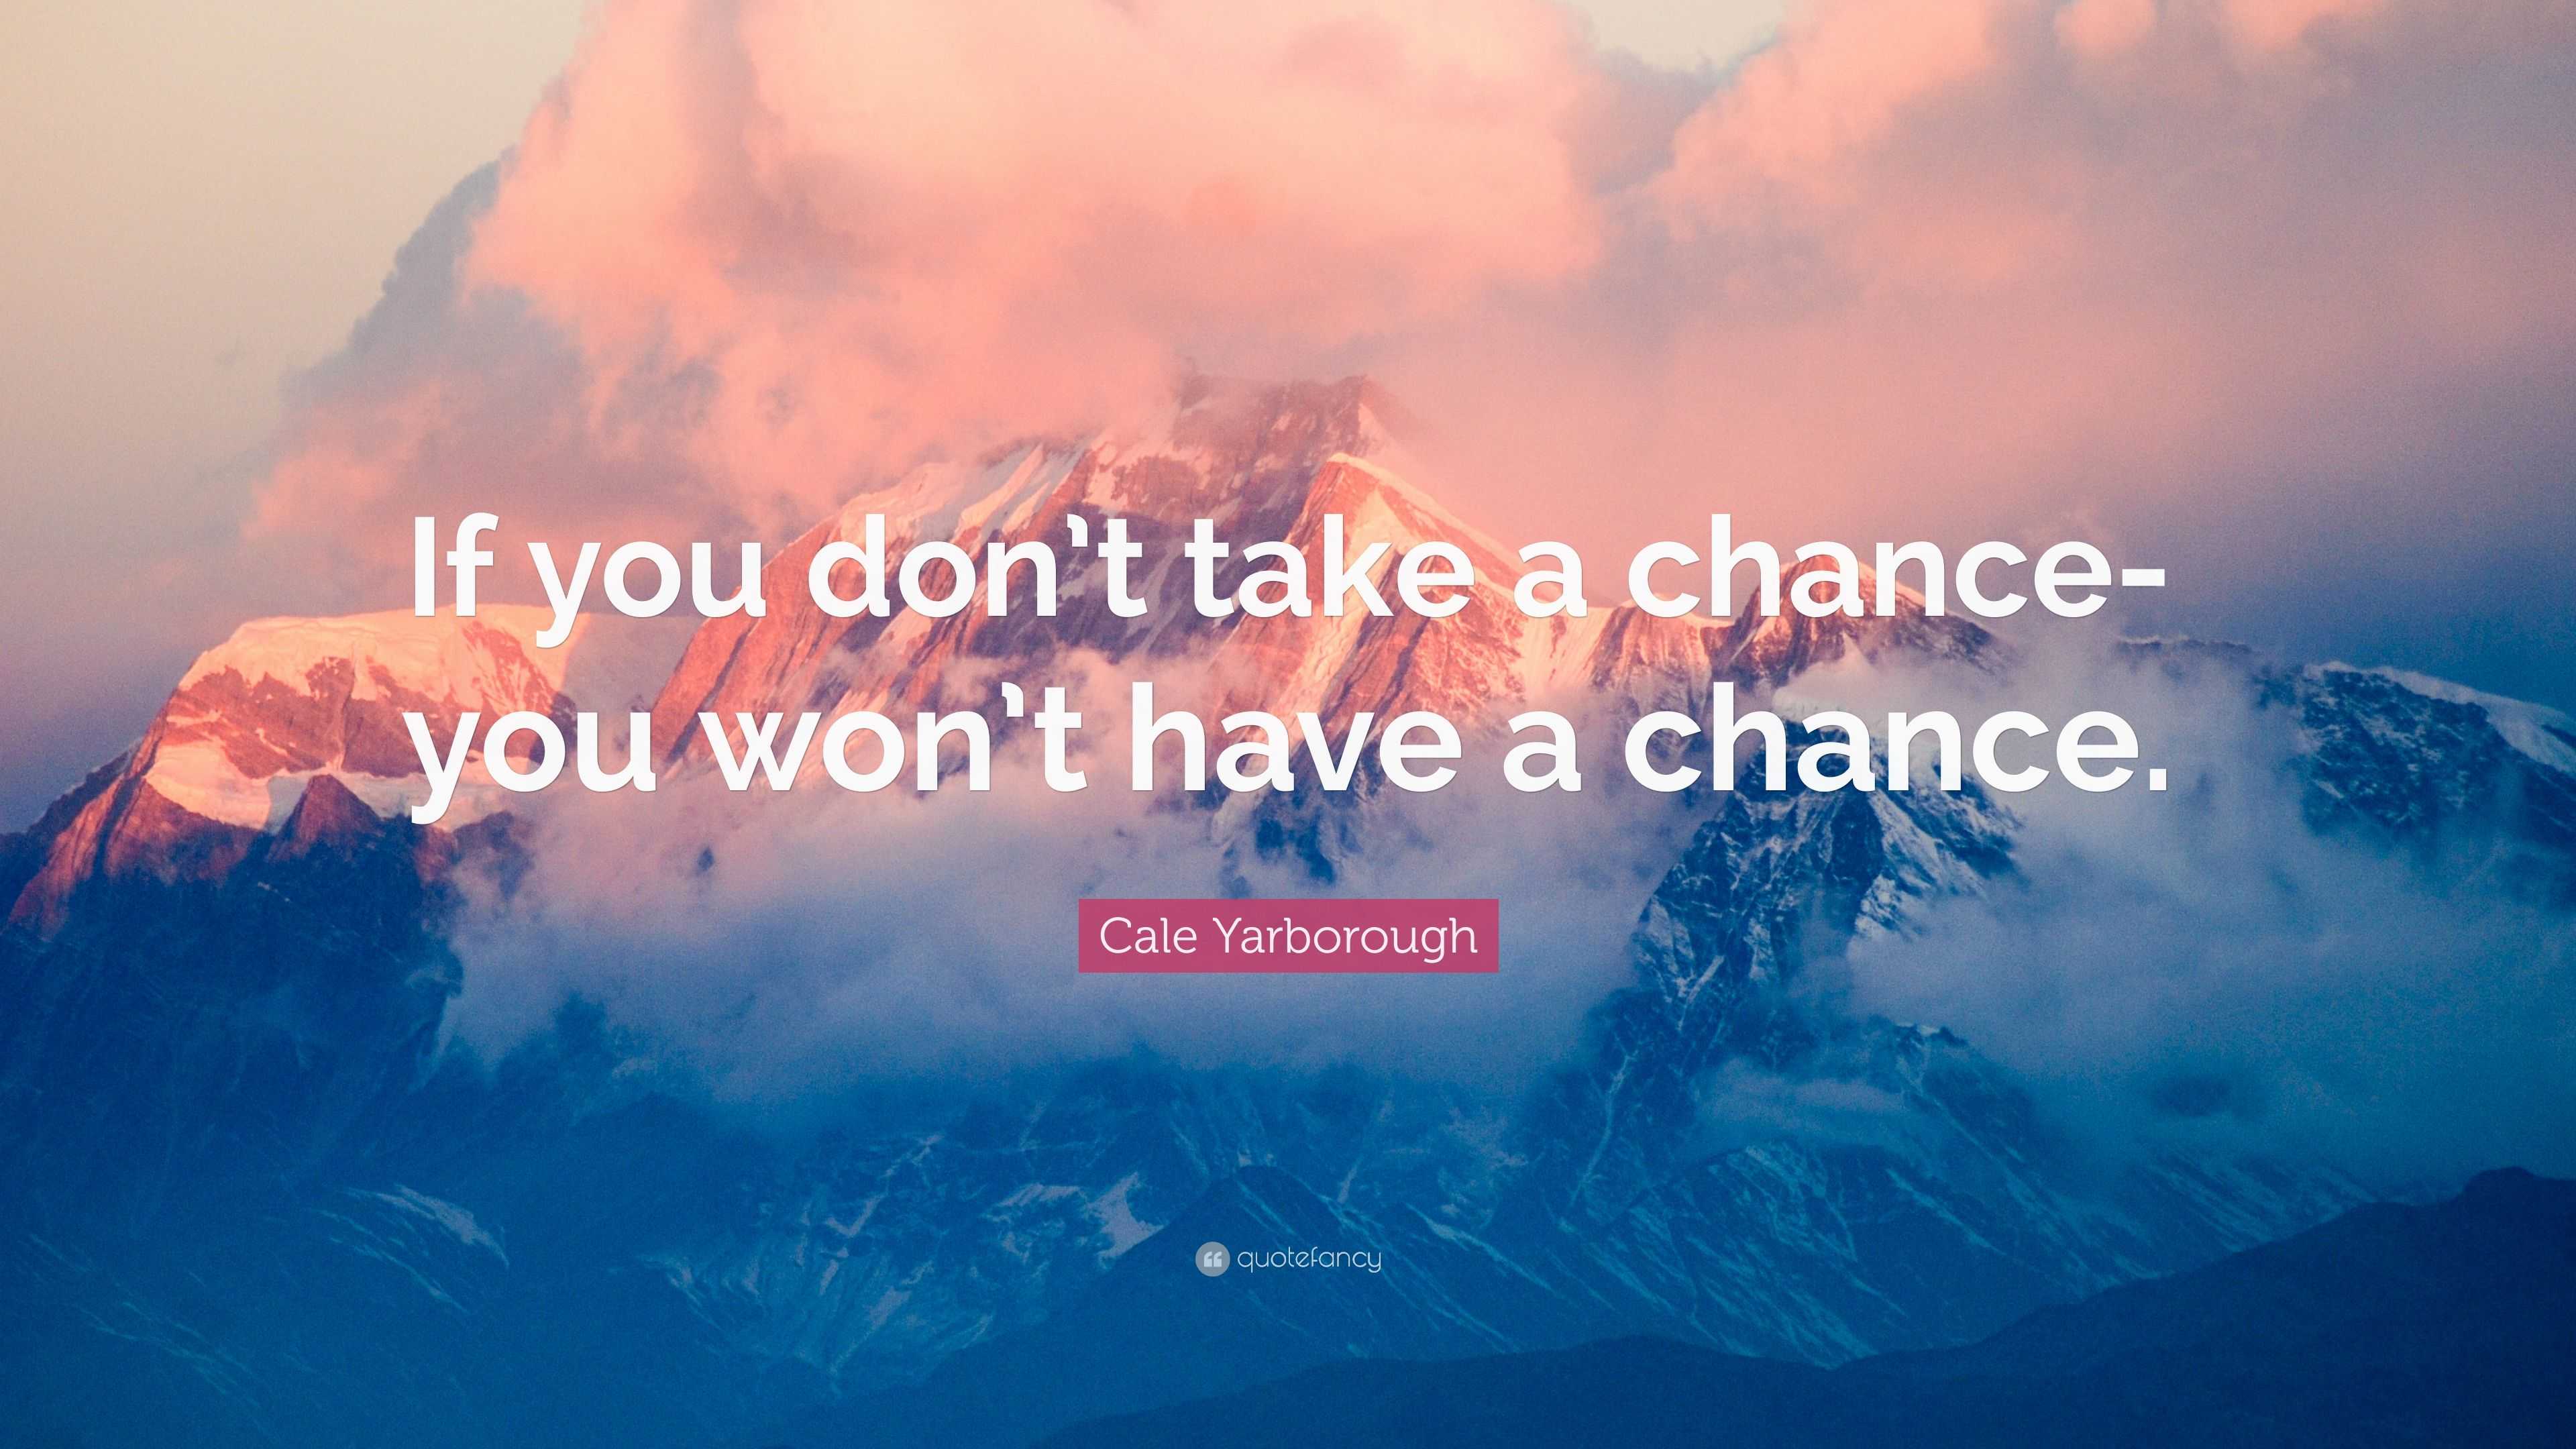 Cale Yarborough Quote: “If you don’t take a chance-you won’t have a ...